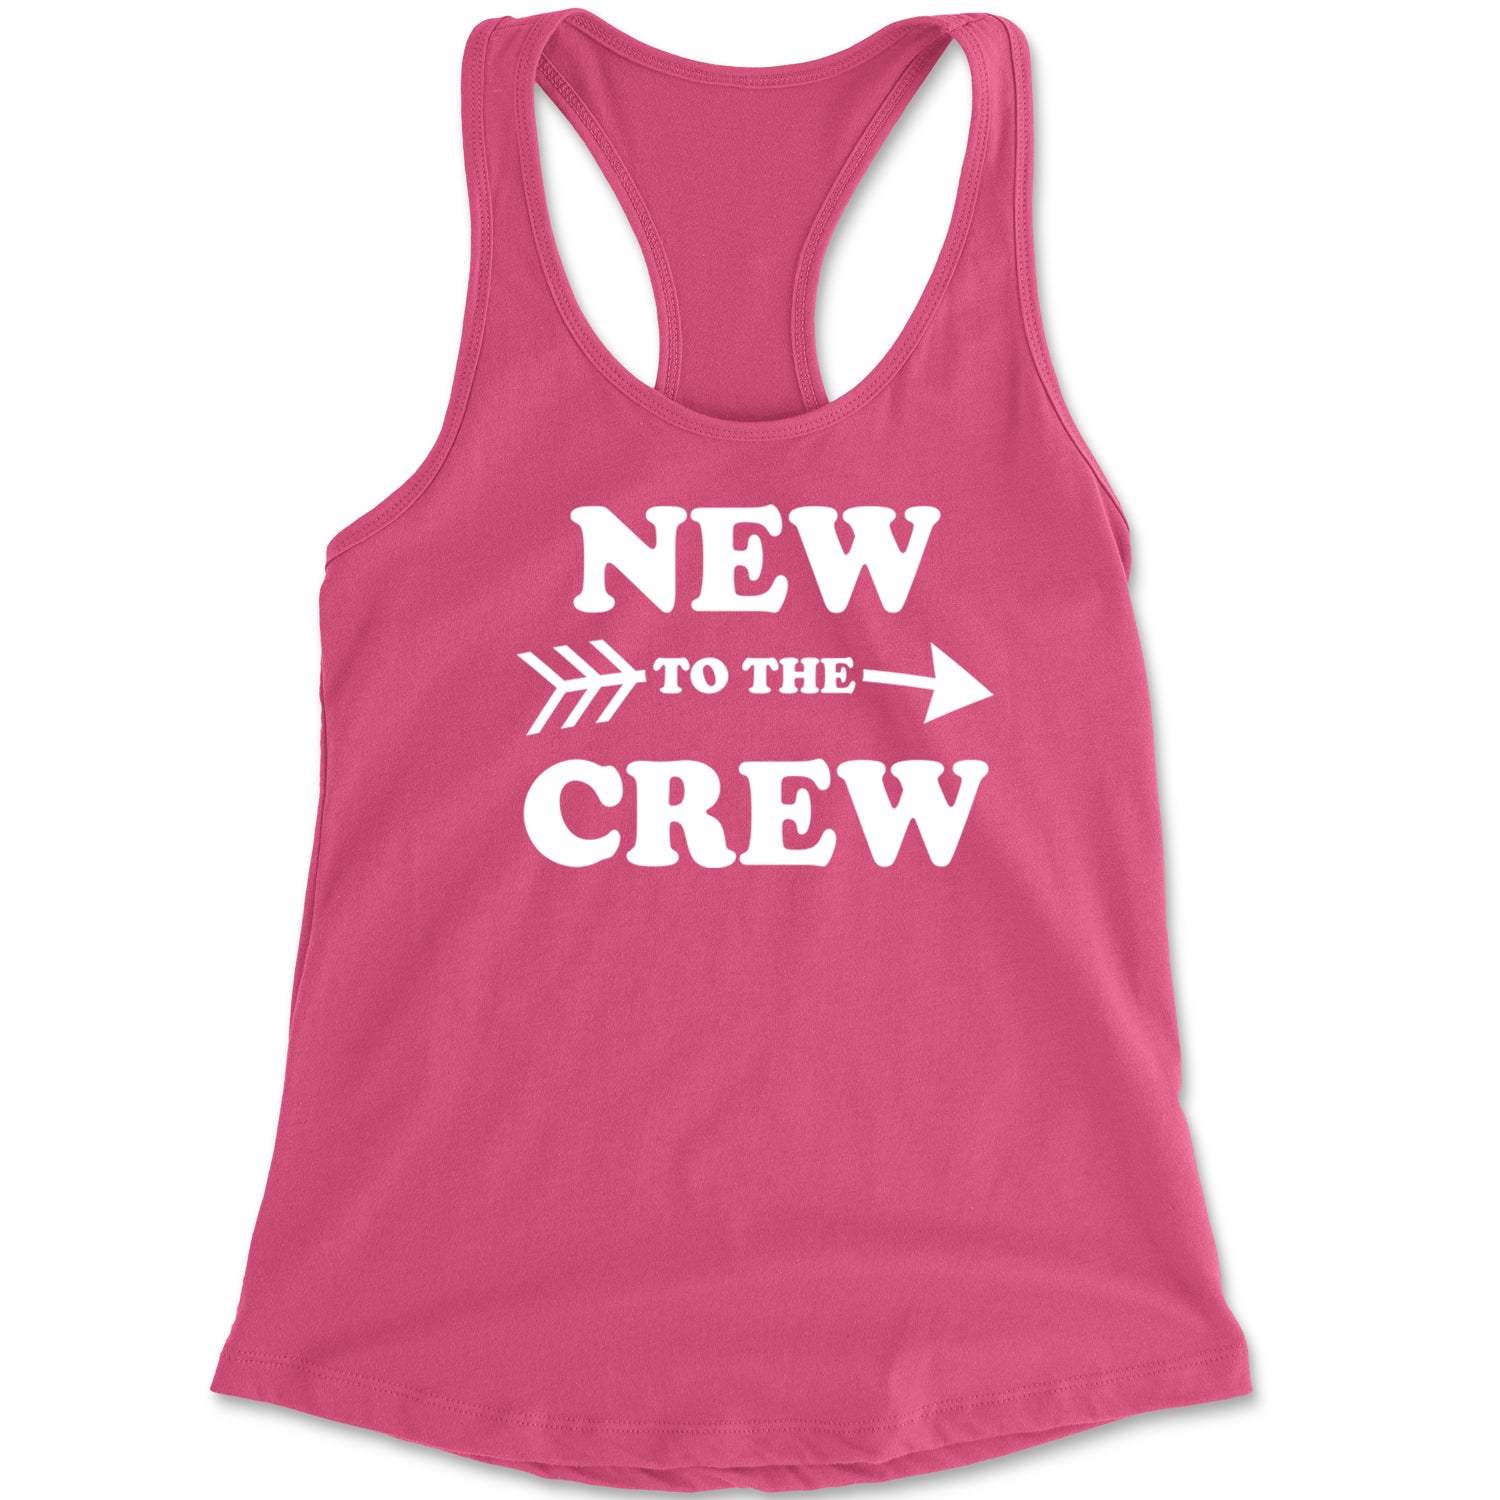 New To The Crew Racerback Tank Top for Women announcement, baby, cousin, gender, newborn, reveal, toddler by Expression Tees